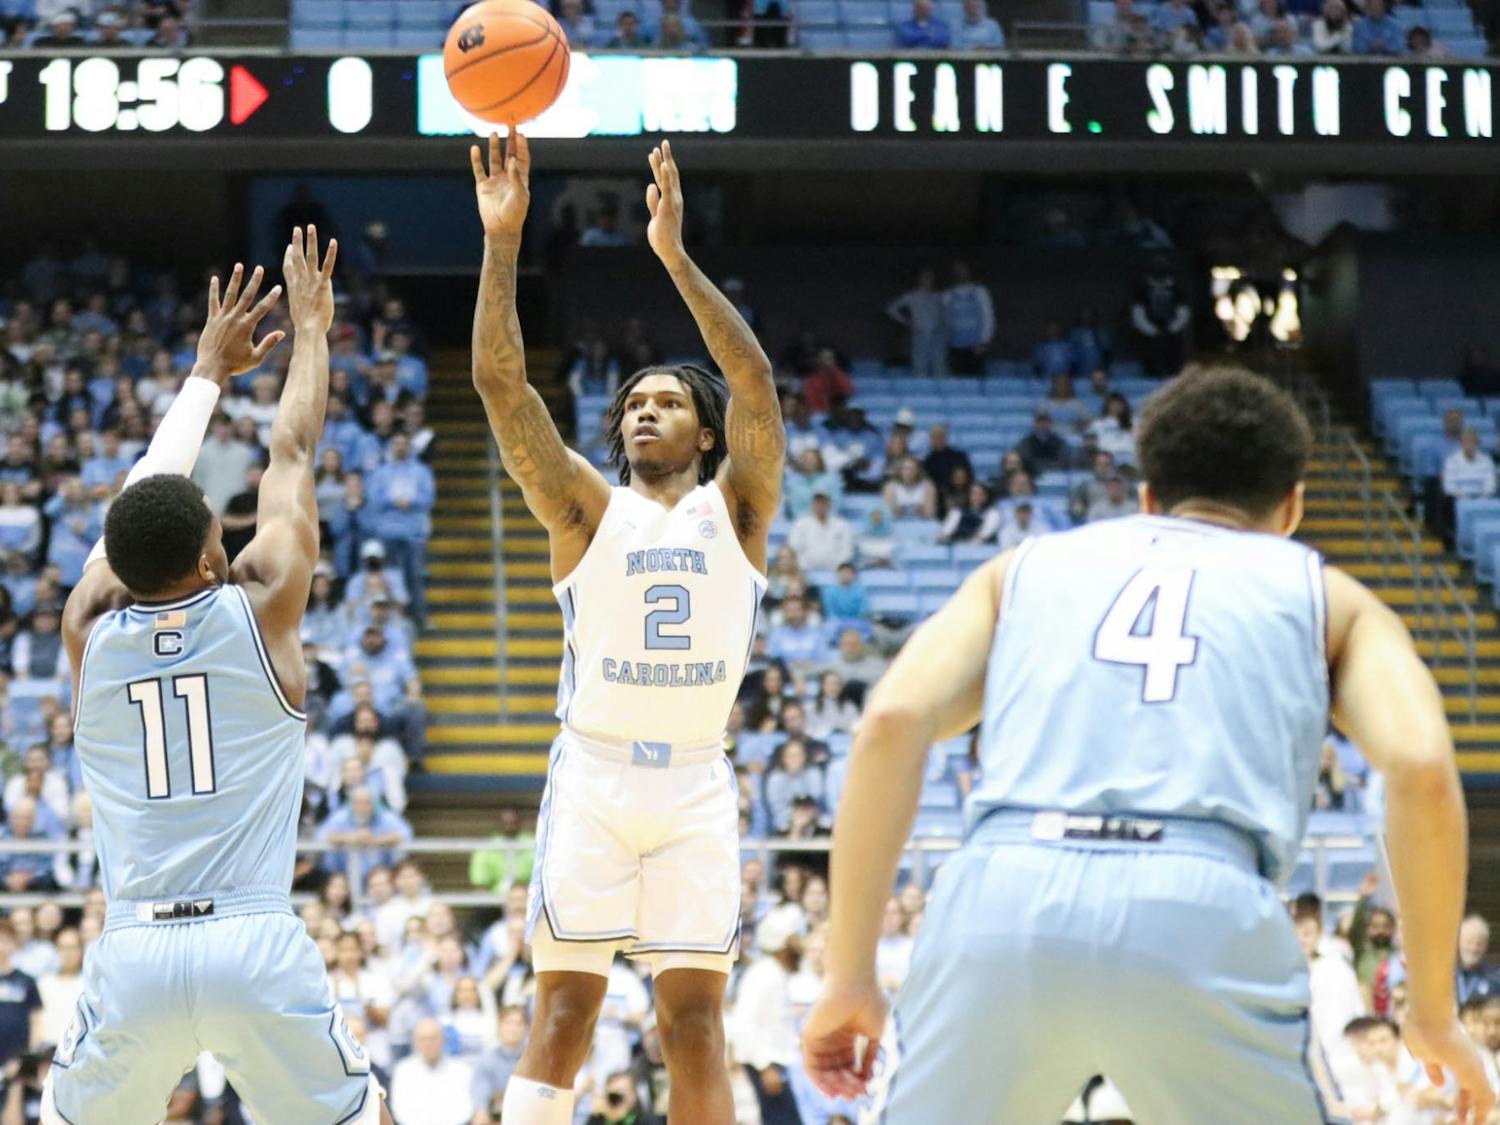 UNC junior guard Caleb Love (2) shoots the ball during the men's basketball game against The Citadel at the Dean Smith Center on Tuesday, Dec. 13, 2022. UNC beat The Citadel 100-67.